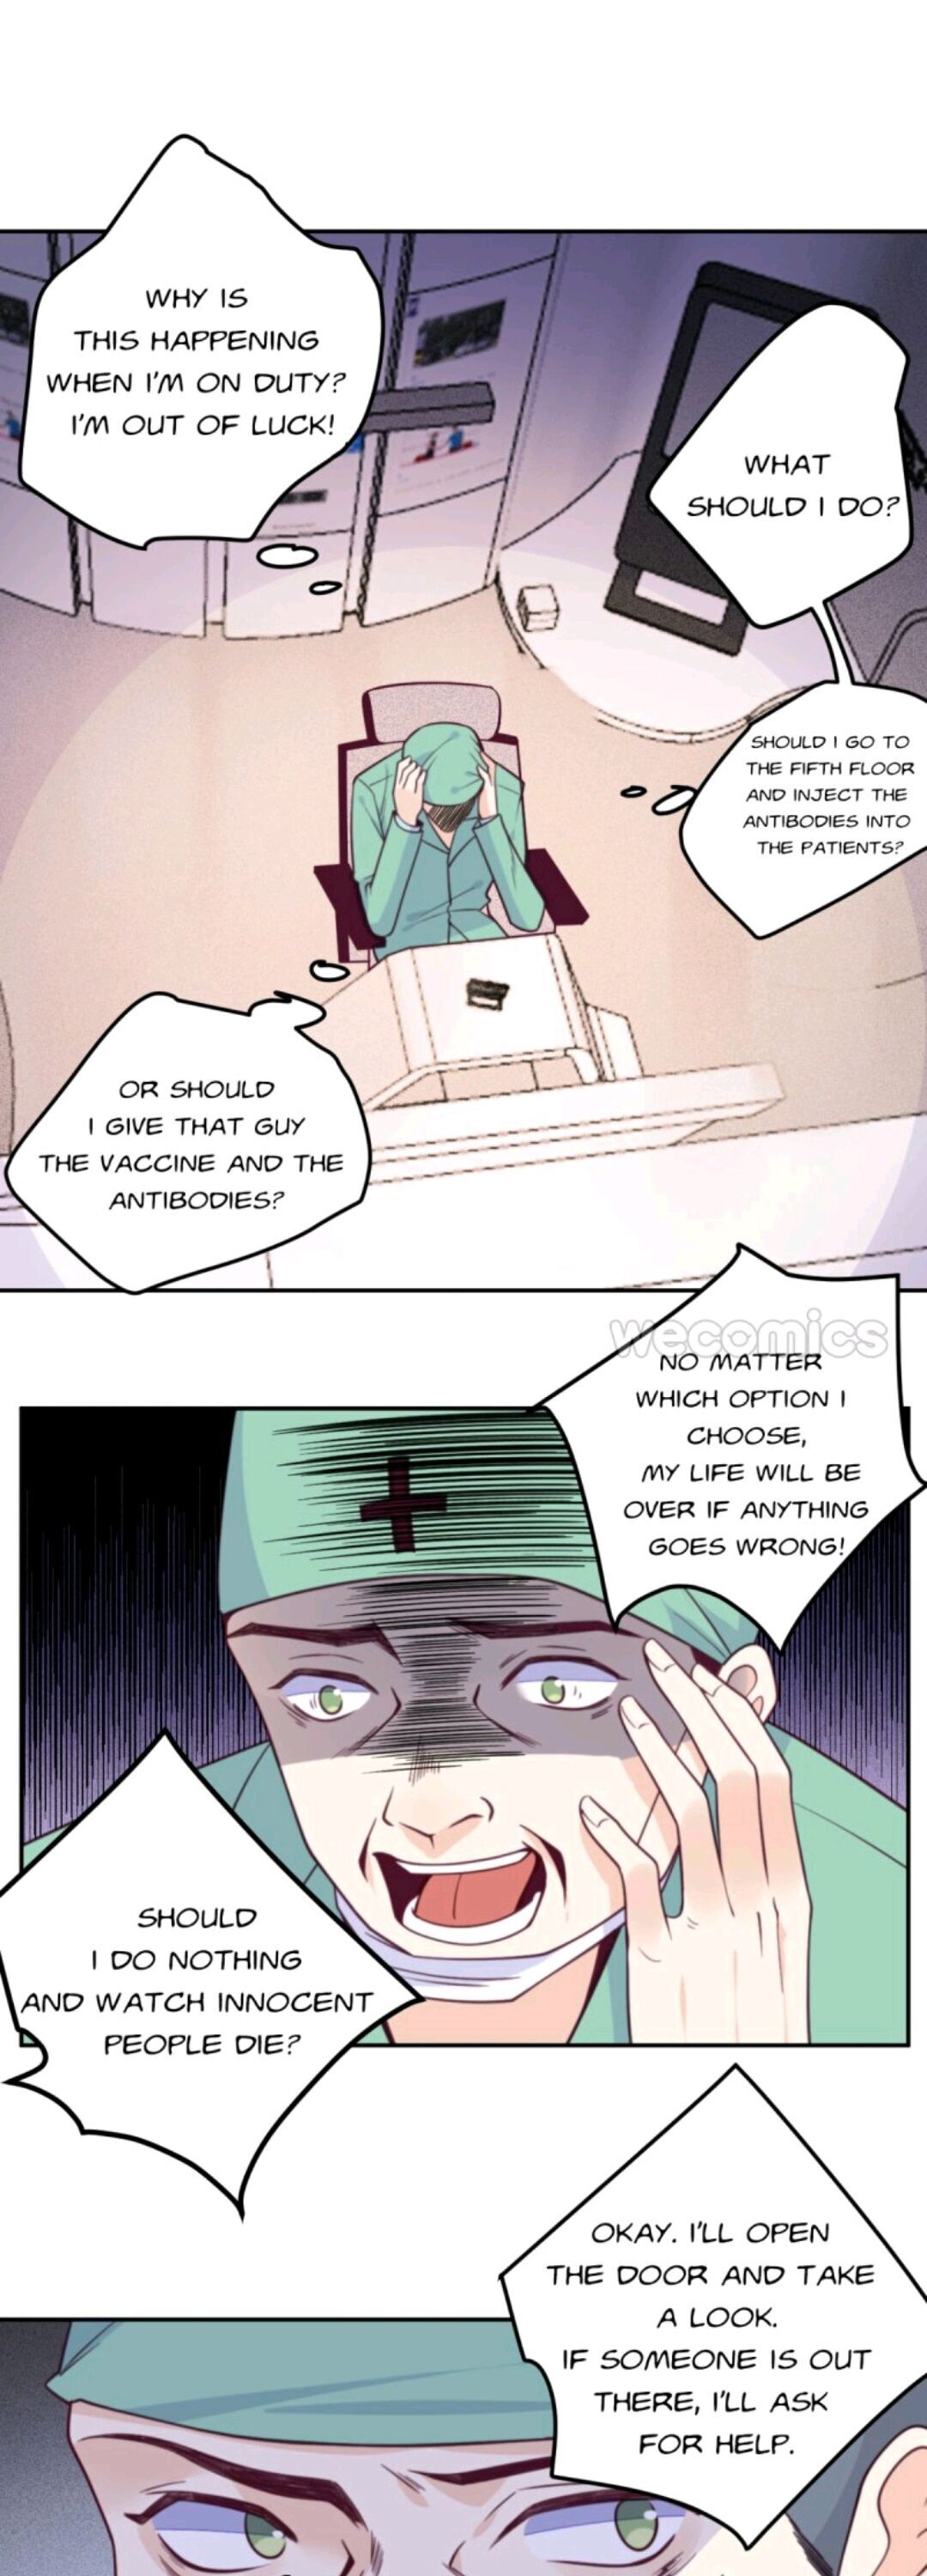 Presenting My Sadistic Manager With Stupidity - Page 1